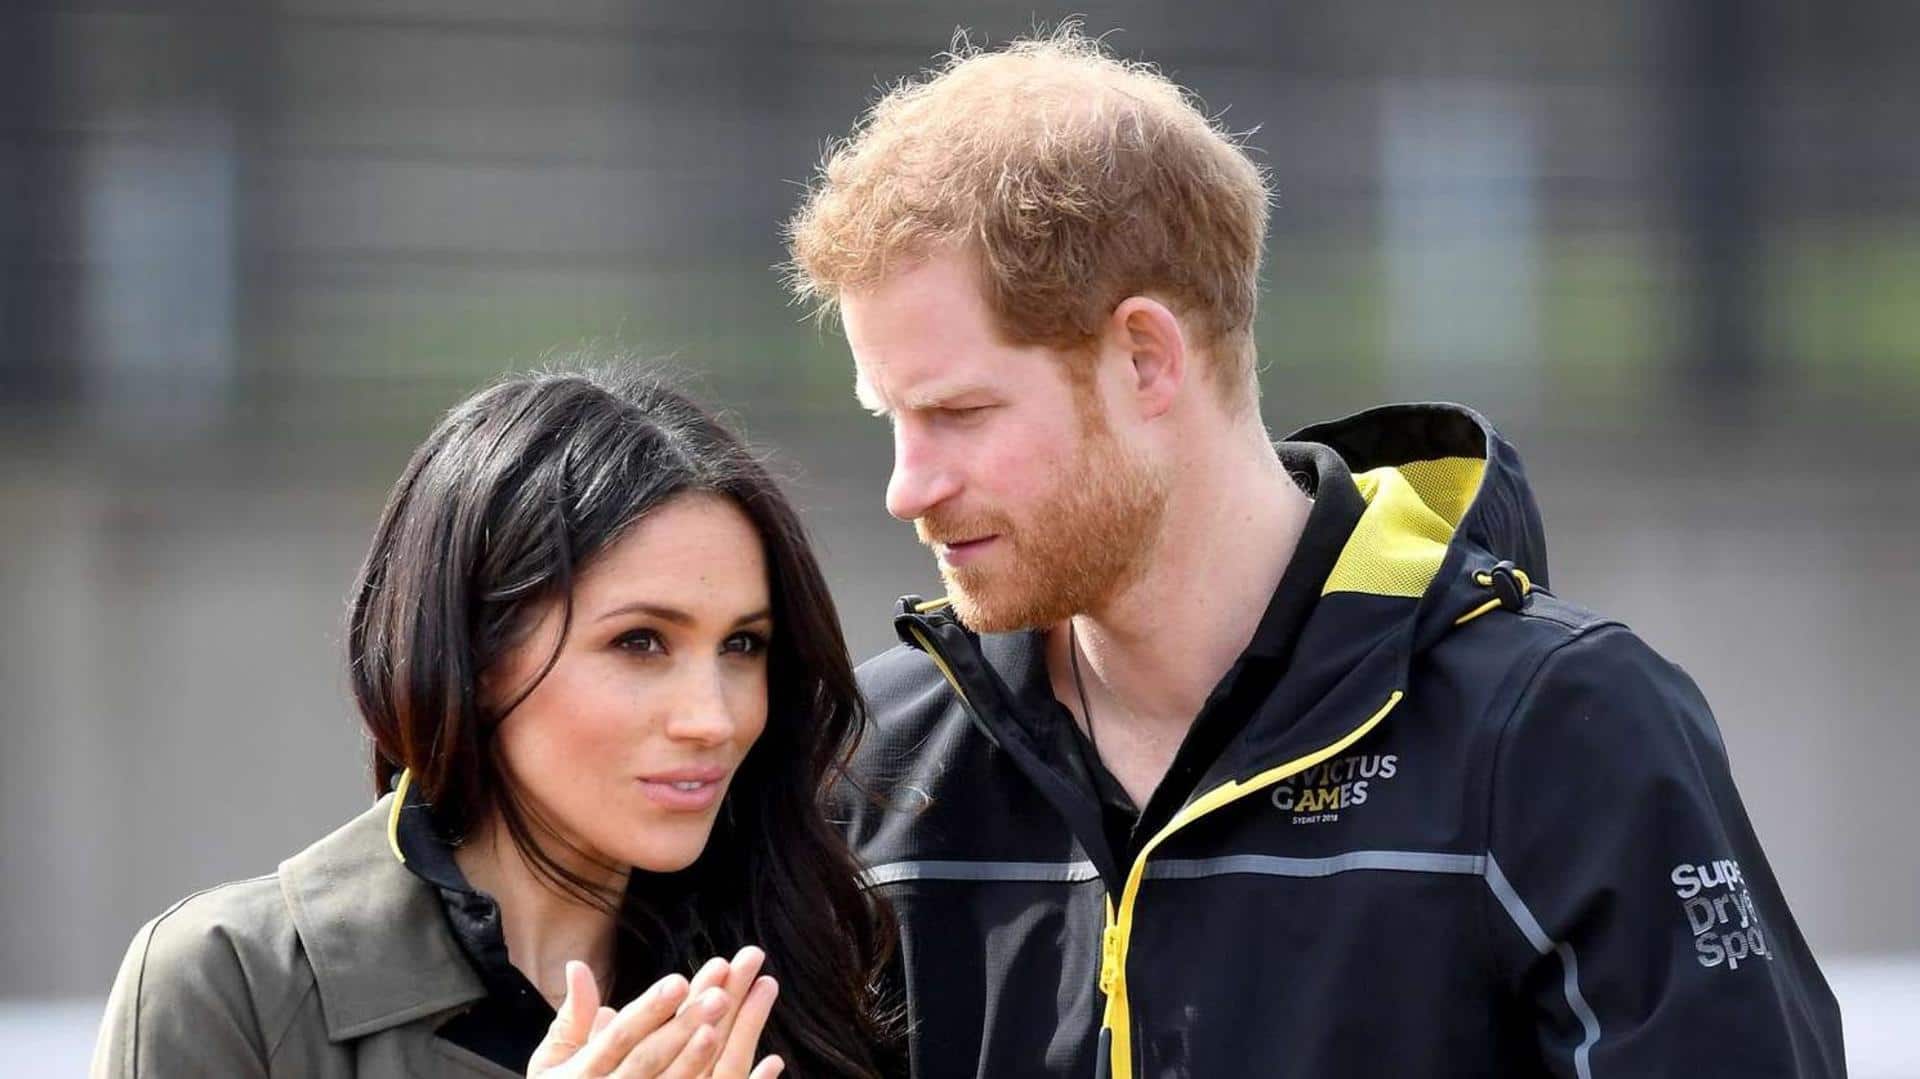 Prince Harry-Meghan Markle's 'Archetypes' won't return to Spotify for S02